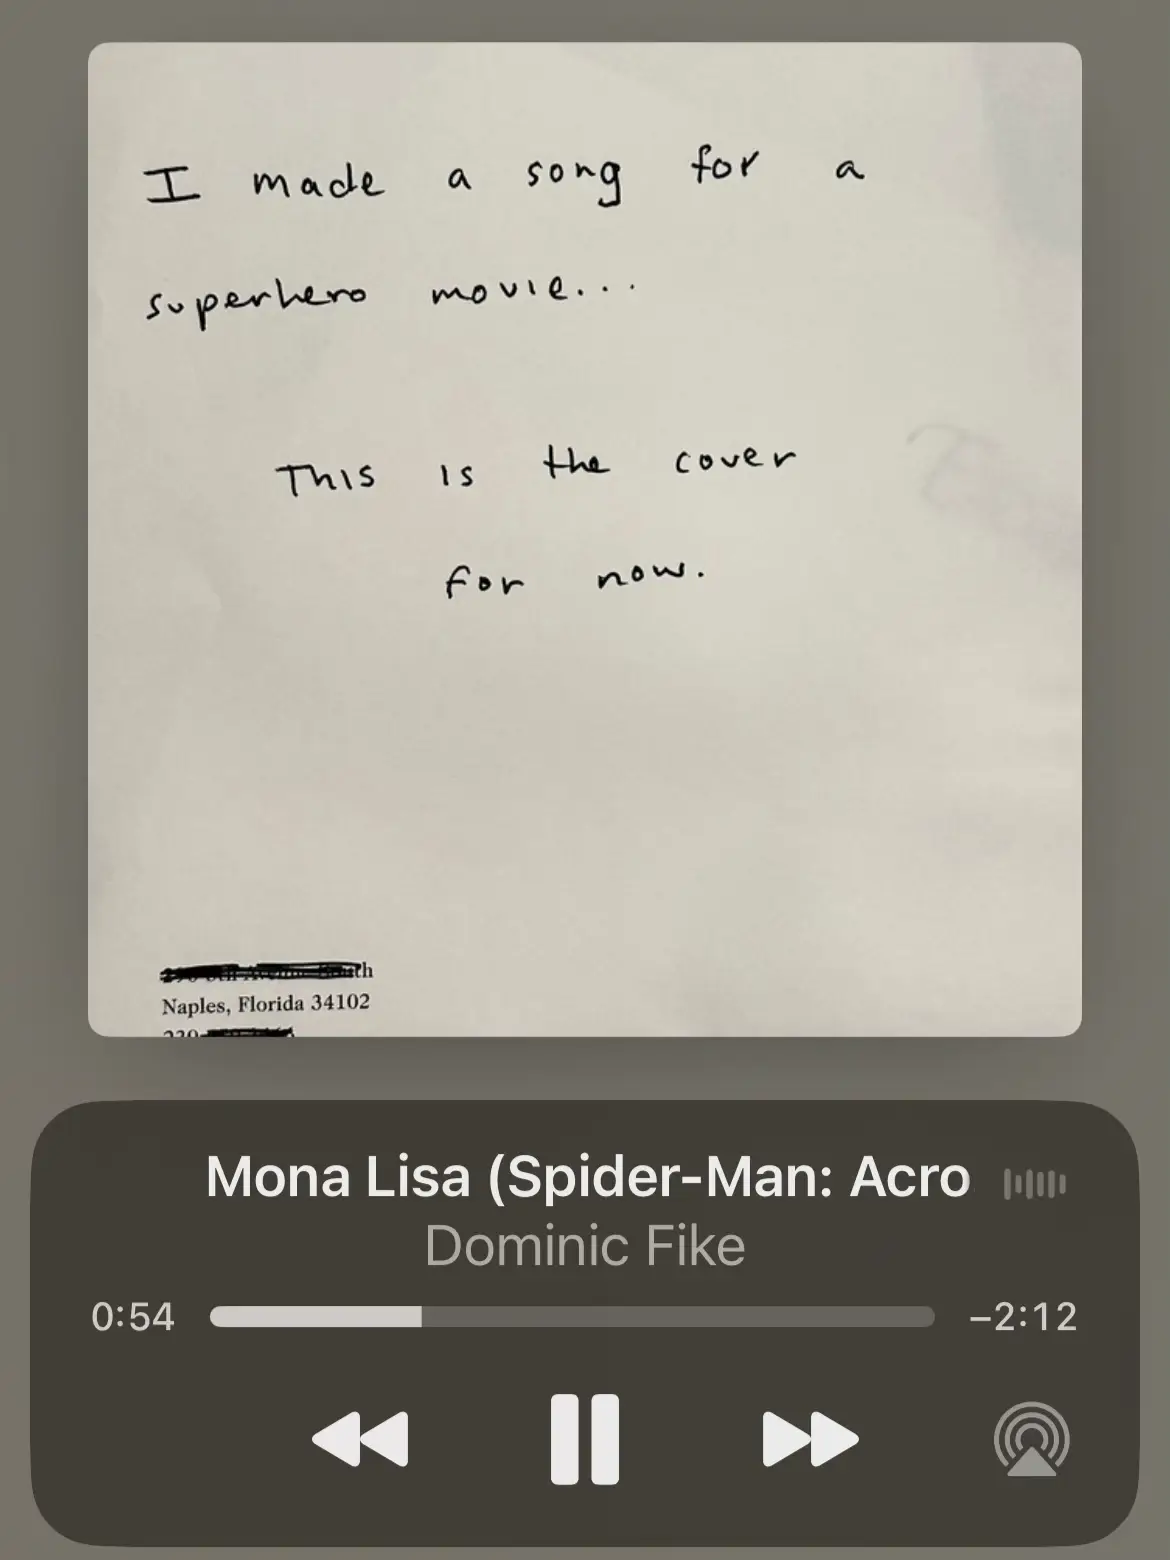  A song for a movie Mona Lisa.